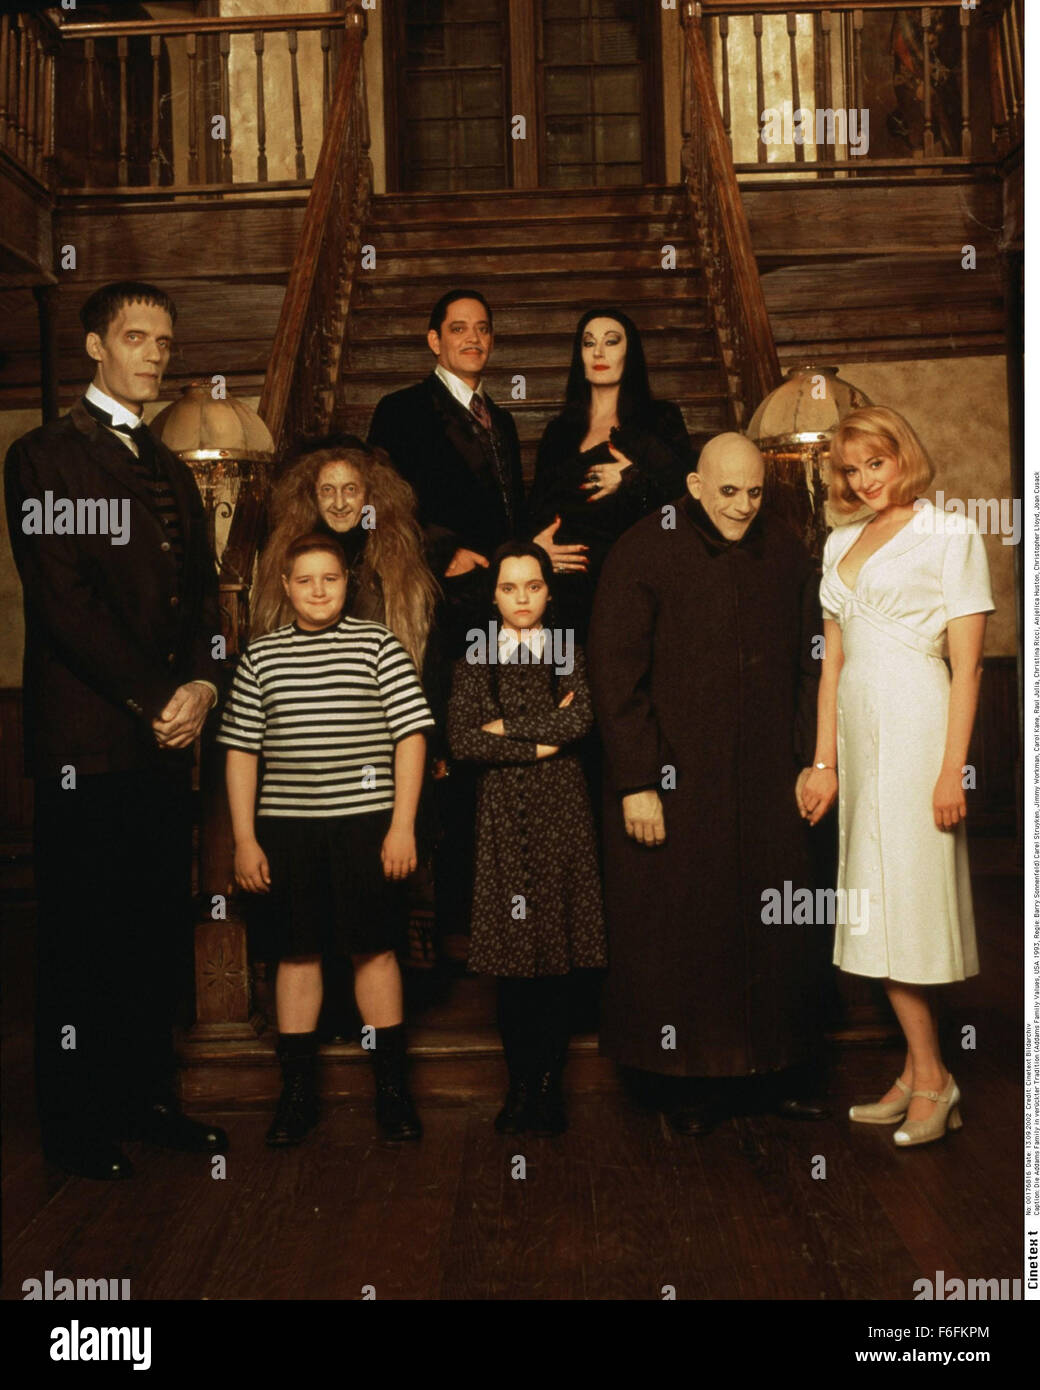 RELEASE DATE: 22 November 1991. MOVIE TITLE: The Addams Family - STUDIO: Paramount Pictures. PLOT: Con artists plan to fleece the eccentric family using an accomplice who claims to be their long lost Uncle Fester. PICTURED: CAREL STRUYCKEN as Lurch with JIMMY WORKMAN as Pugsley Addams, JUDITH MALINA as Grandma, RAUL JULIA as Gomez Addams, CHRISTINA RICCI as Wednesday Addams, ANJELICA HUSTON as Morticia Addams, CHRISTOPHER LLOYD as Uncle Fester and JOAN CUSACK as Debbie Jellinsky. Stock Photo